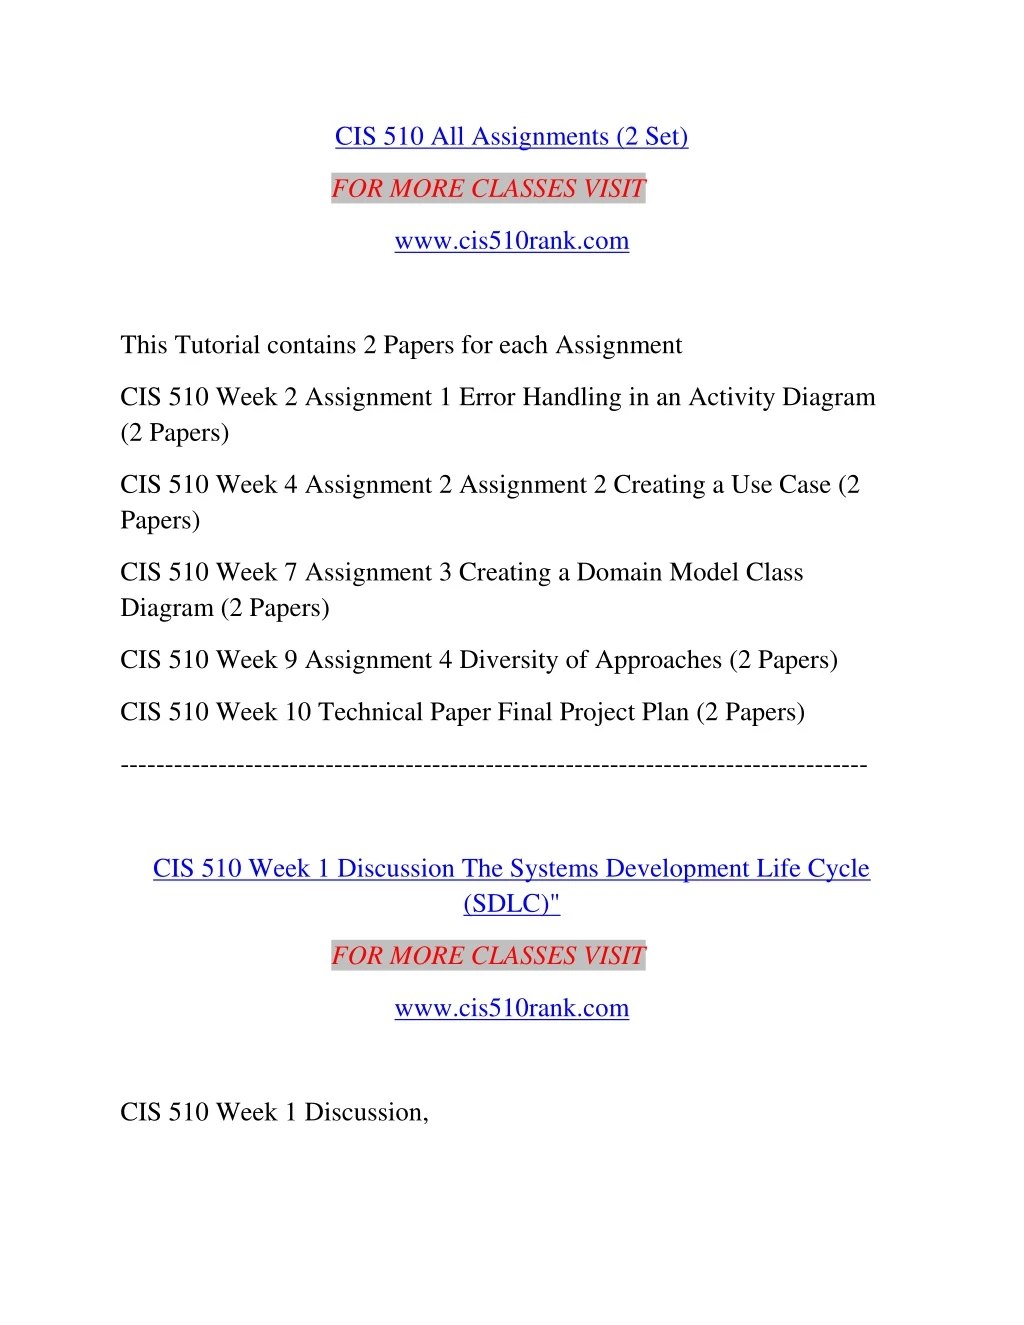 cis 510 all assignments 2 set